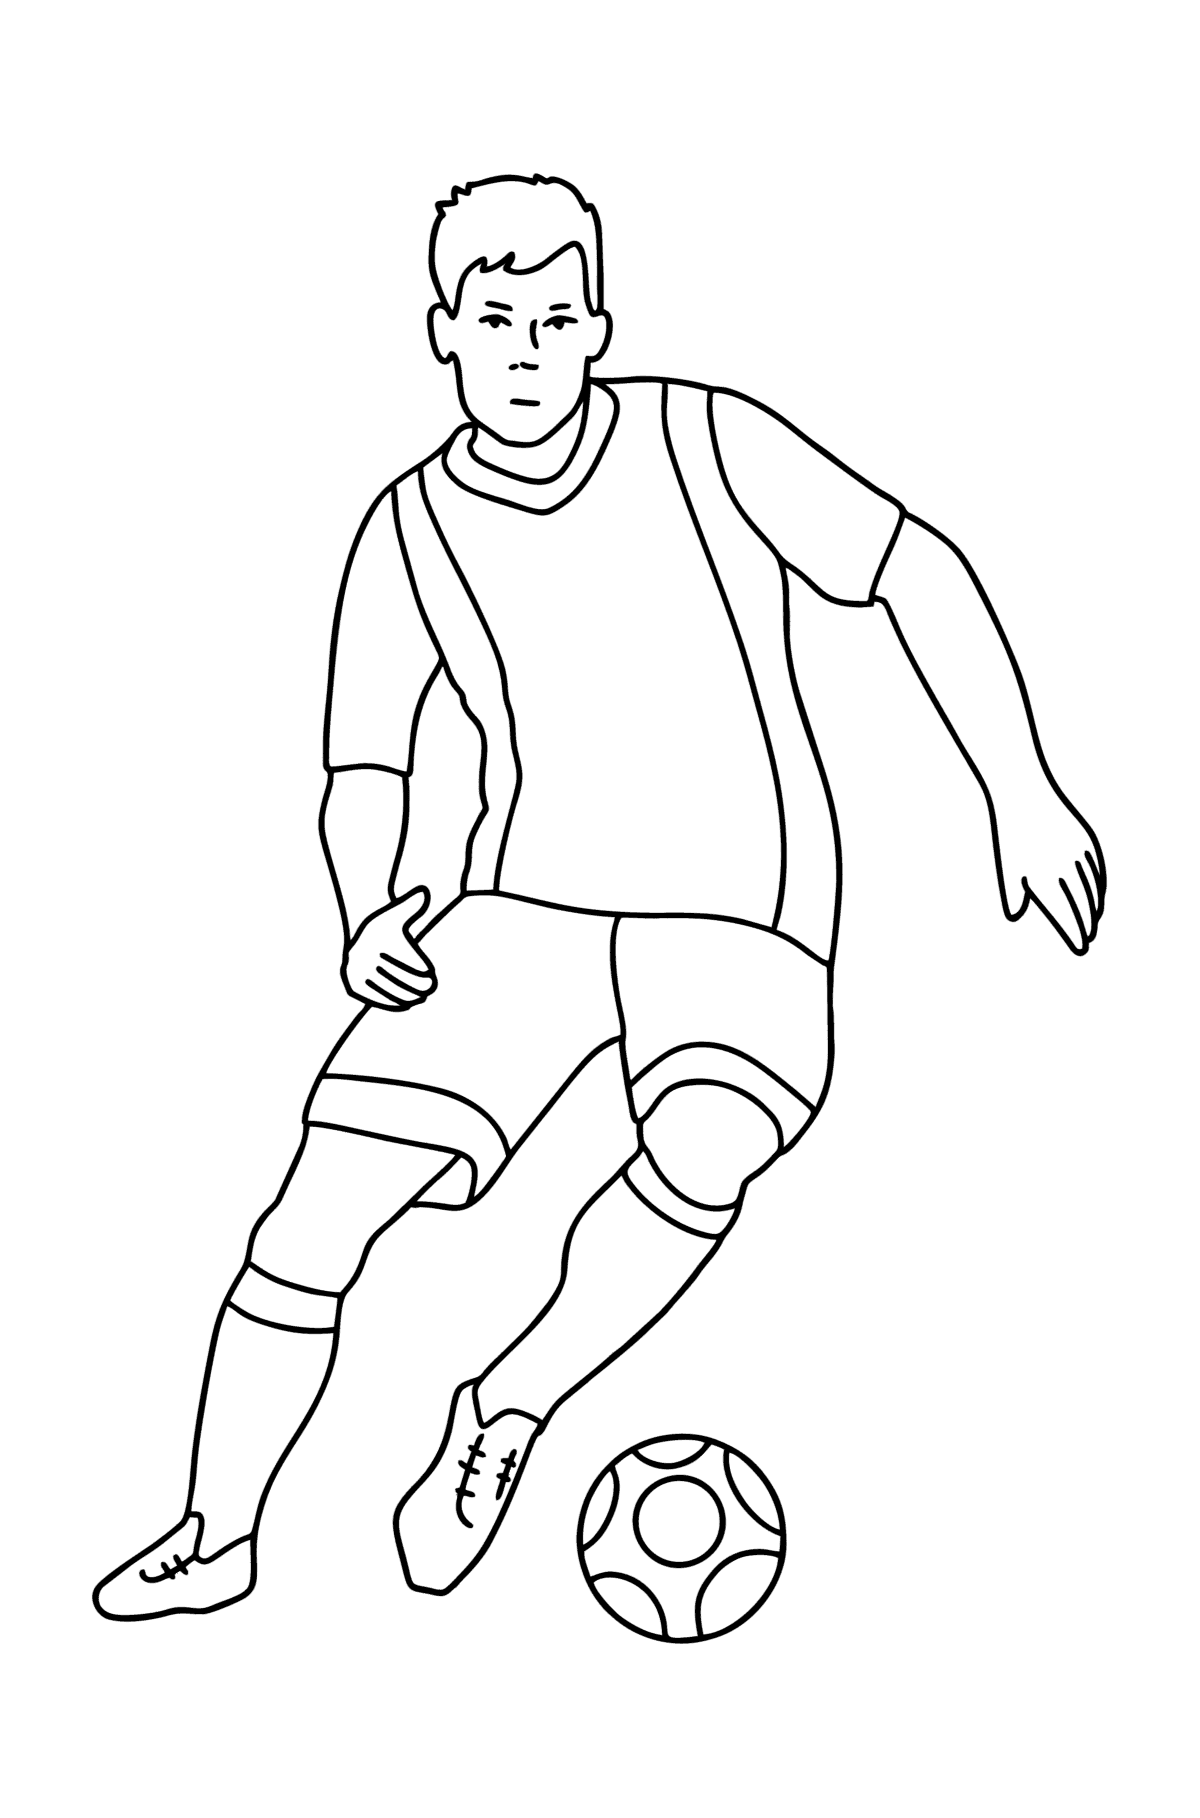 UEFA Football Player сoloring page - Coloring Pages for Kids